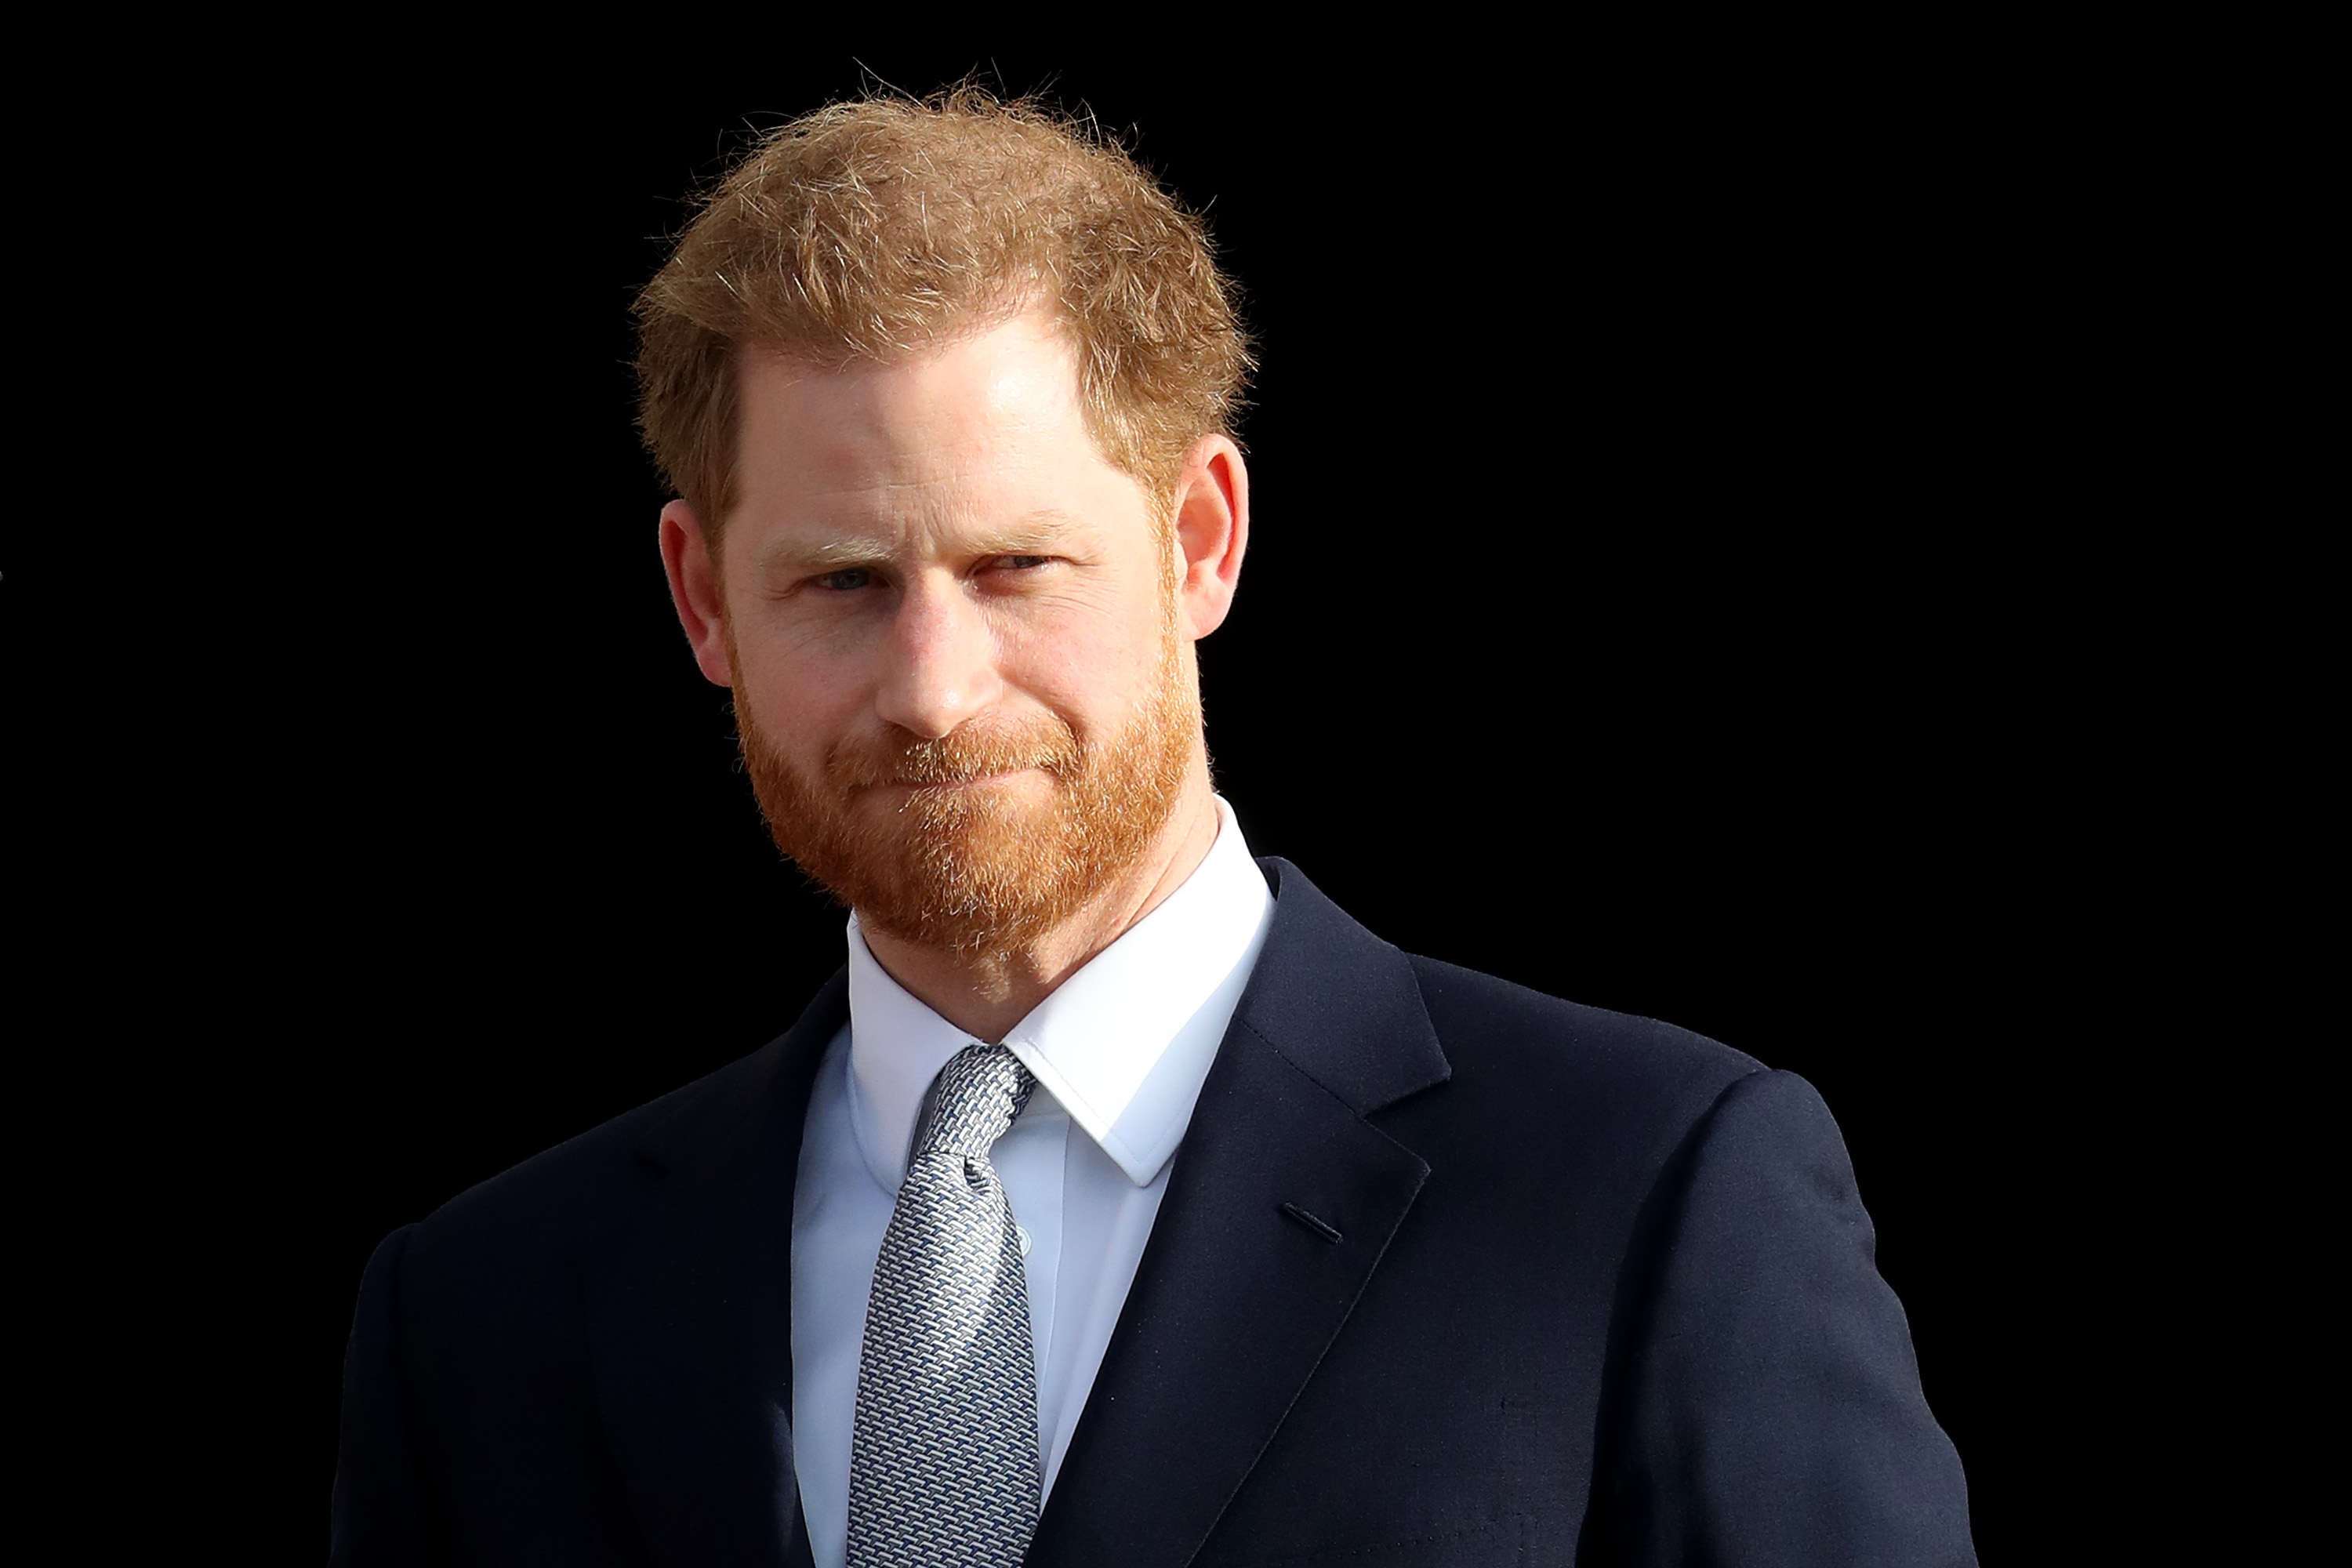 Prince Harry dressed in a suit and tie looking on ahead of Rugby League World Cup 2021